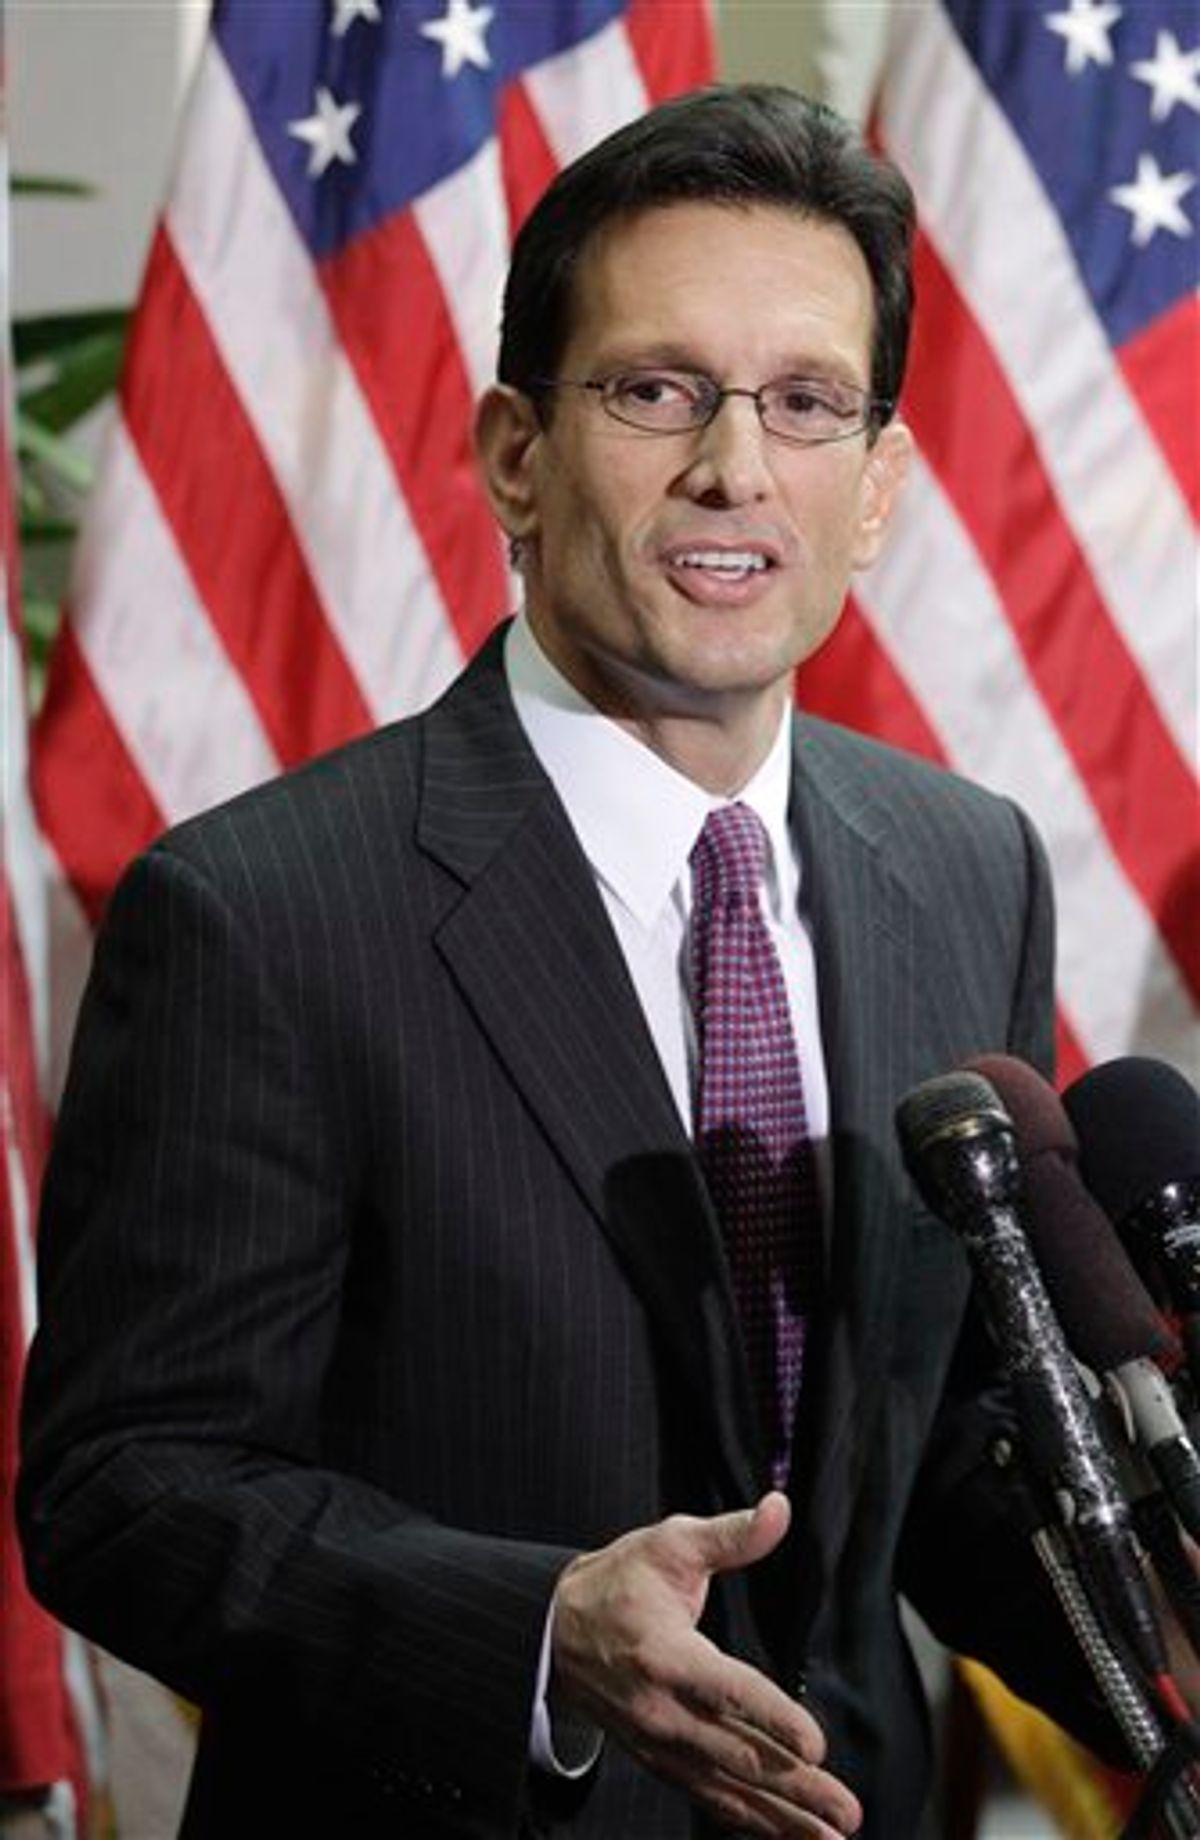 House Majority Leader Eric Cantor of Va., speaks to reporters on Capitol Hill in Washington, Tuesday, Jan. 25, 2011, after a closed GOP caucus meeting ahead of President Barack Obama's State of the Union speech. (AP Photo/Charles Dharapak)  (AP)